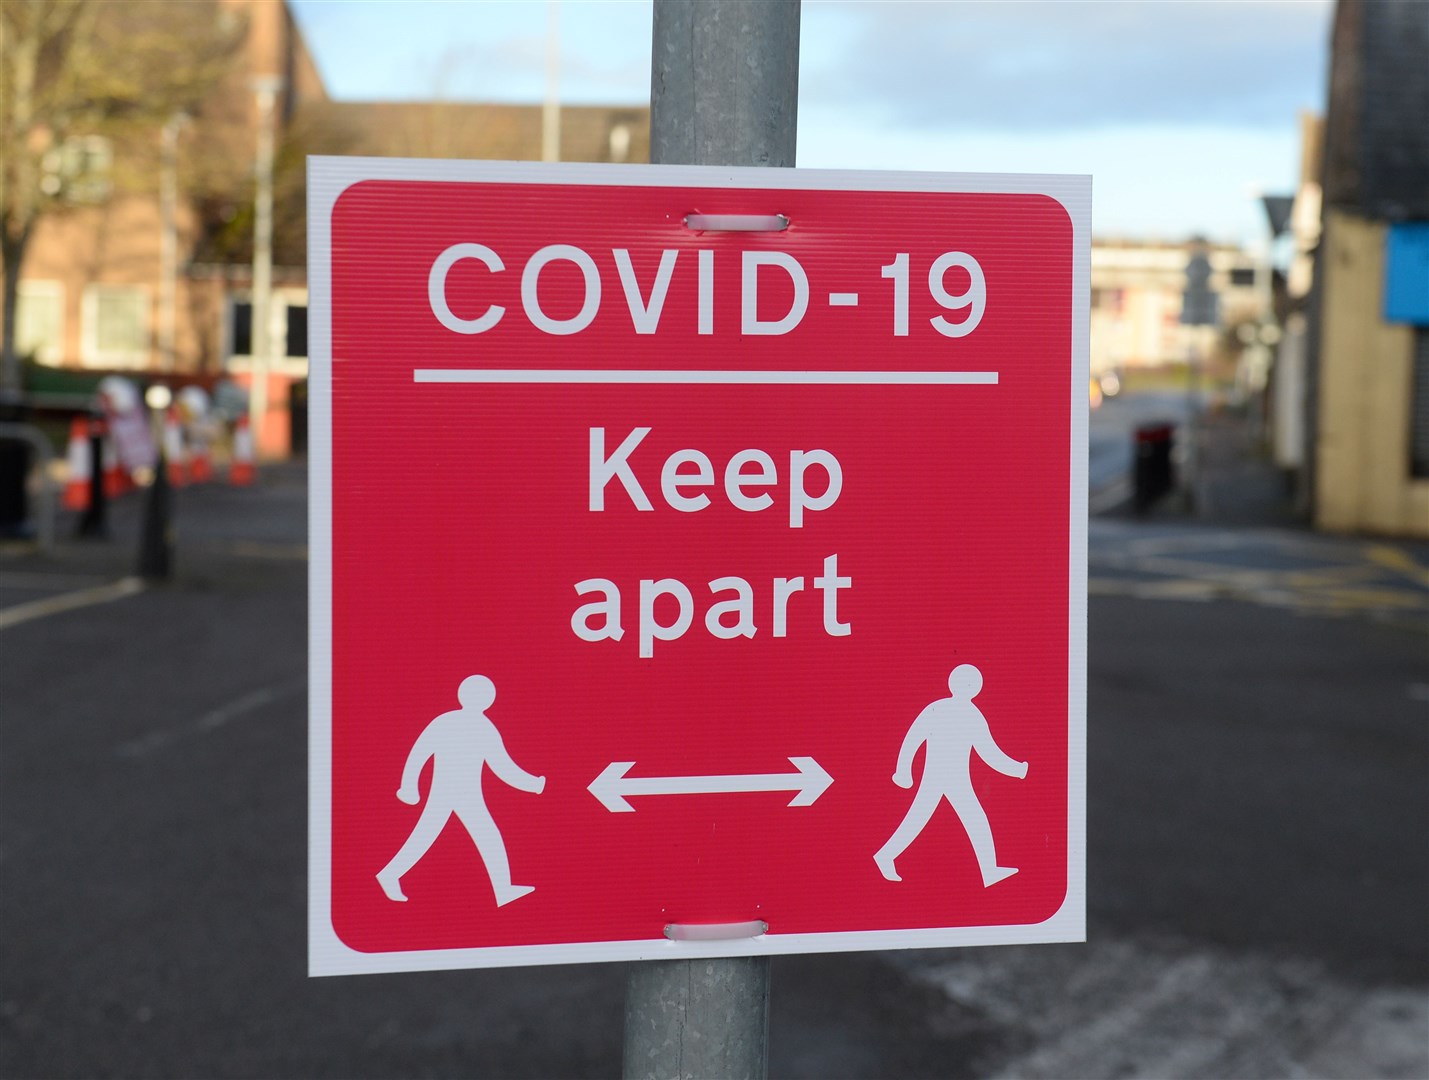 Sticking to the Covid rules is vital if we are to defeat the virus.